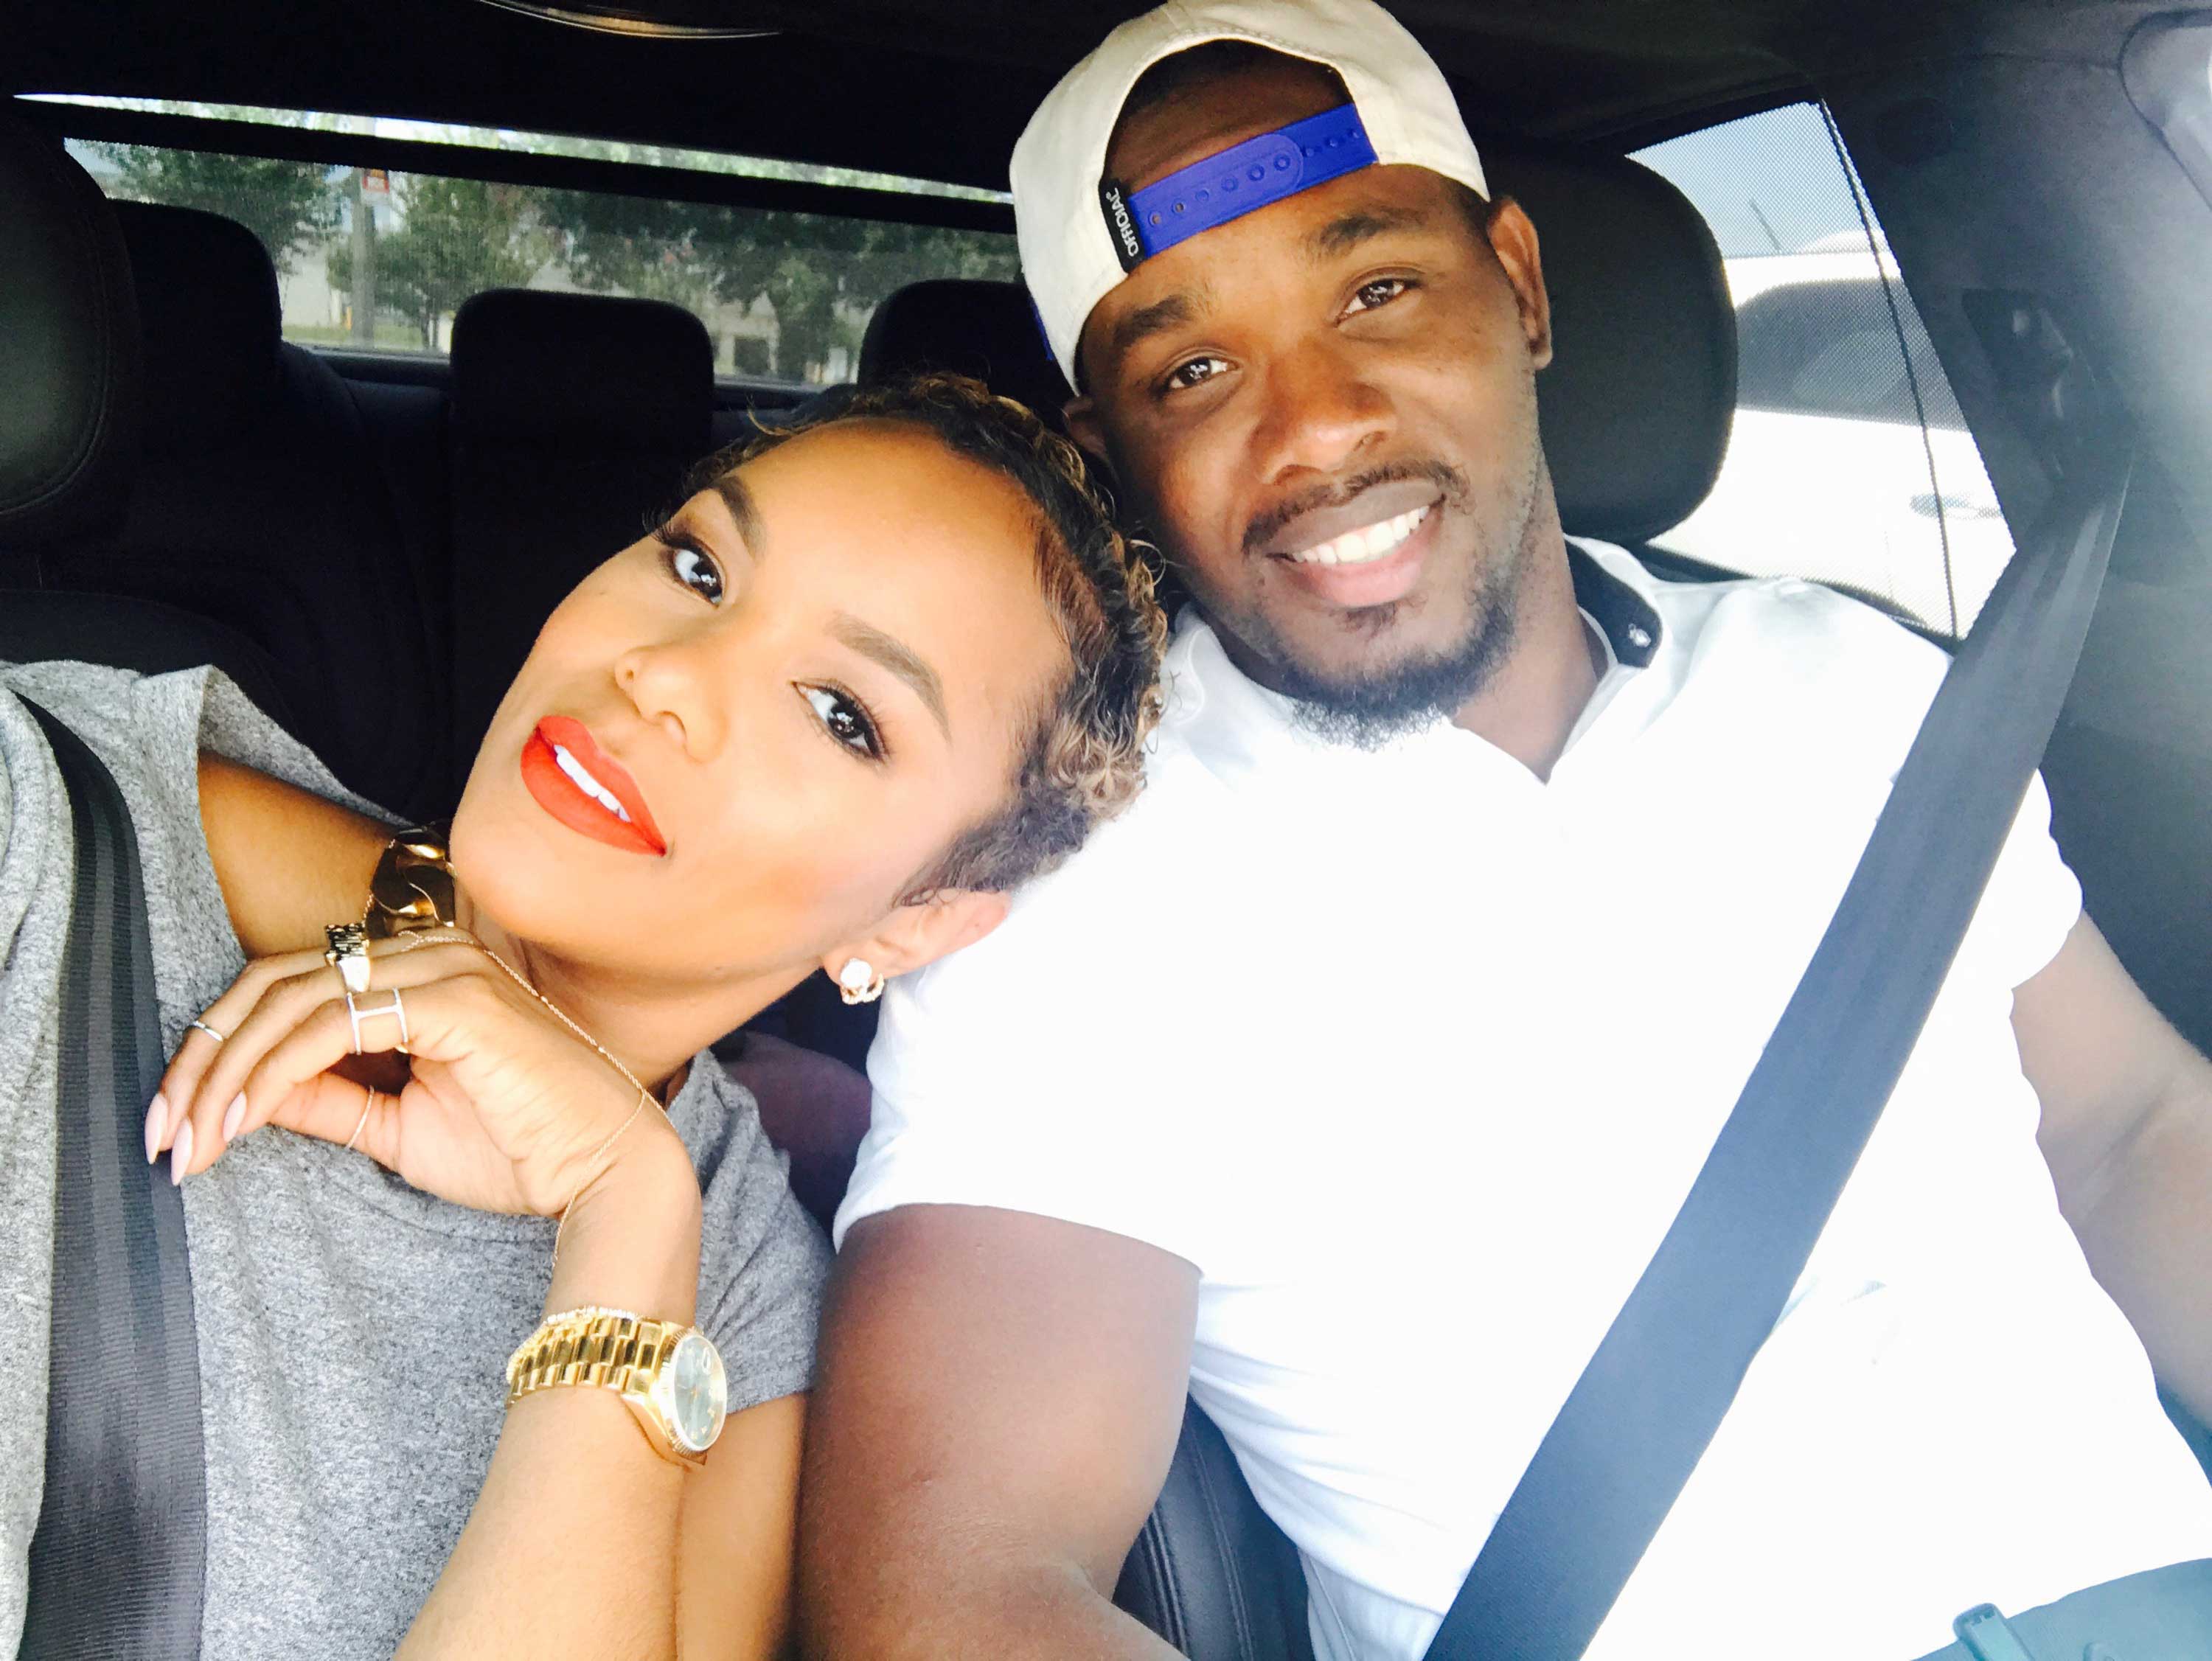 11 Super Sweet Photos Of LeToya Luckett And Her Fiancé